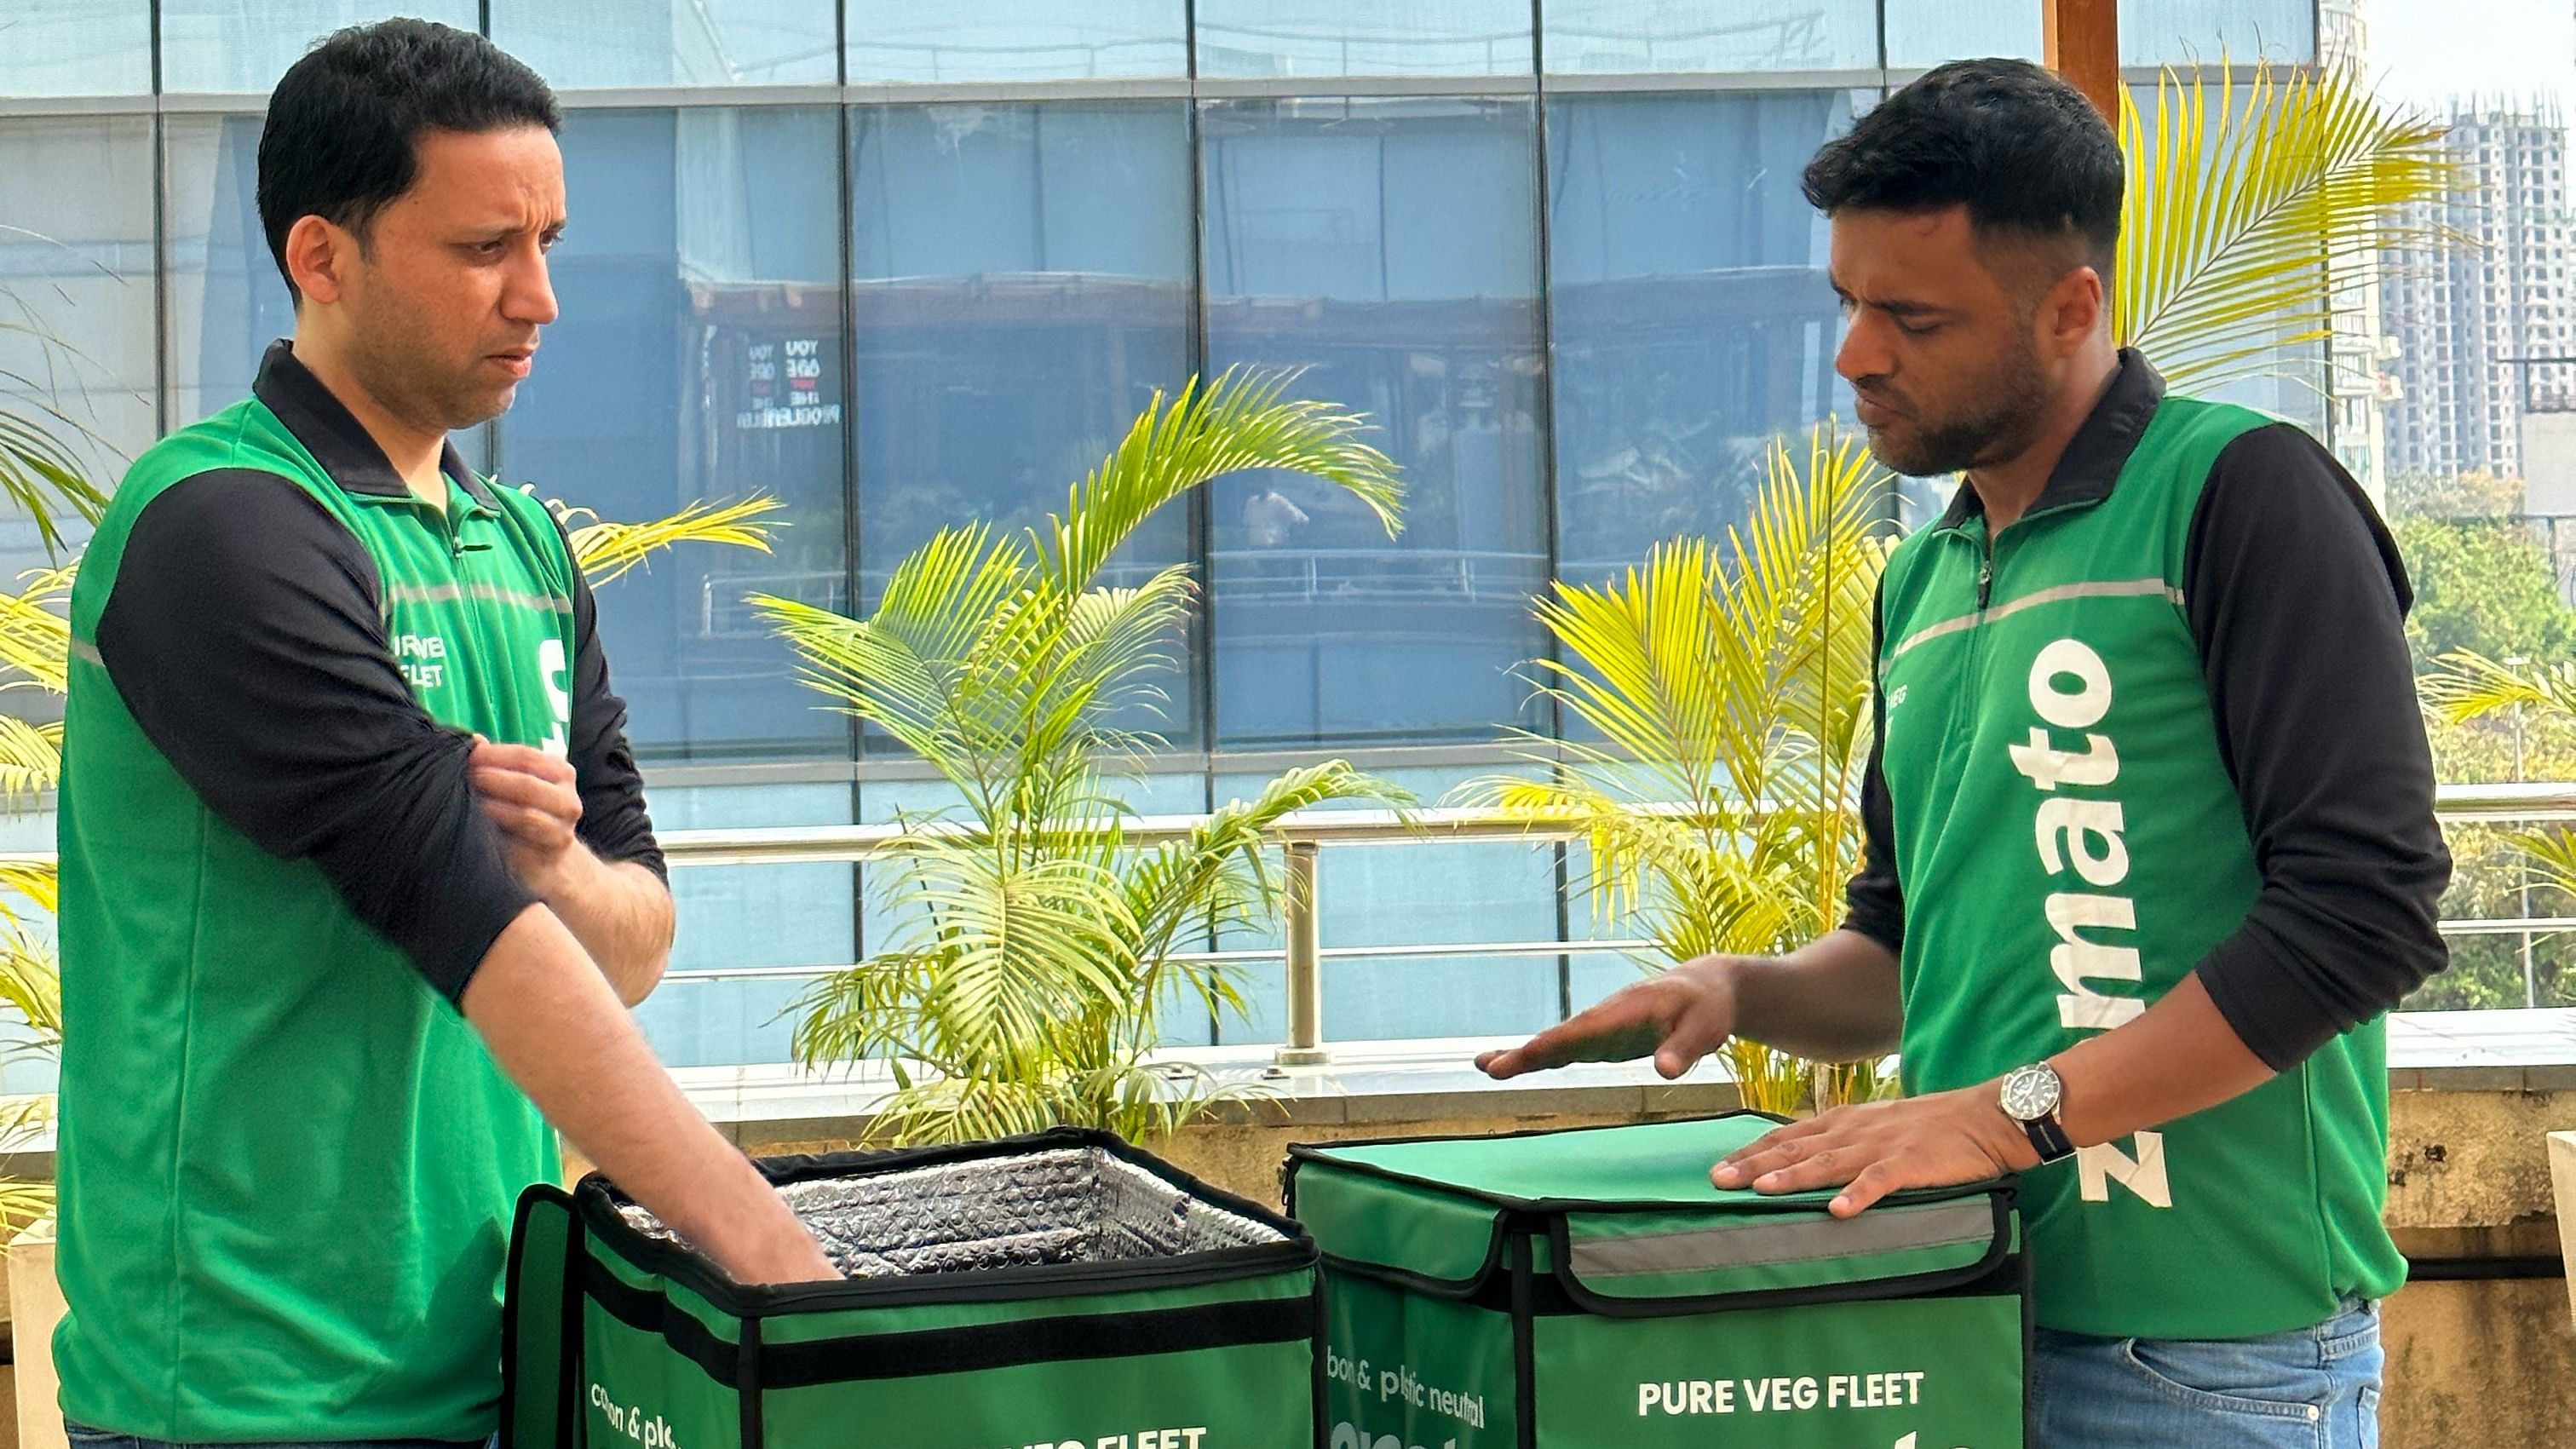 <div class="paragraphs"><p>Zomato's Pure Veg Fleet will use green delivery boxes instead of the standard red ones.</p></div>